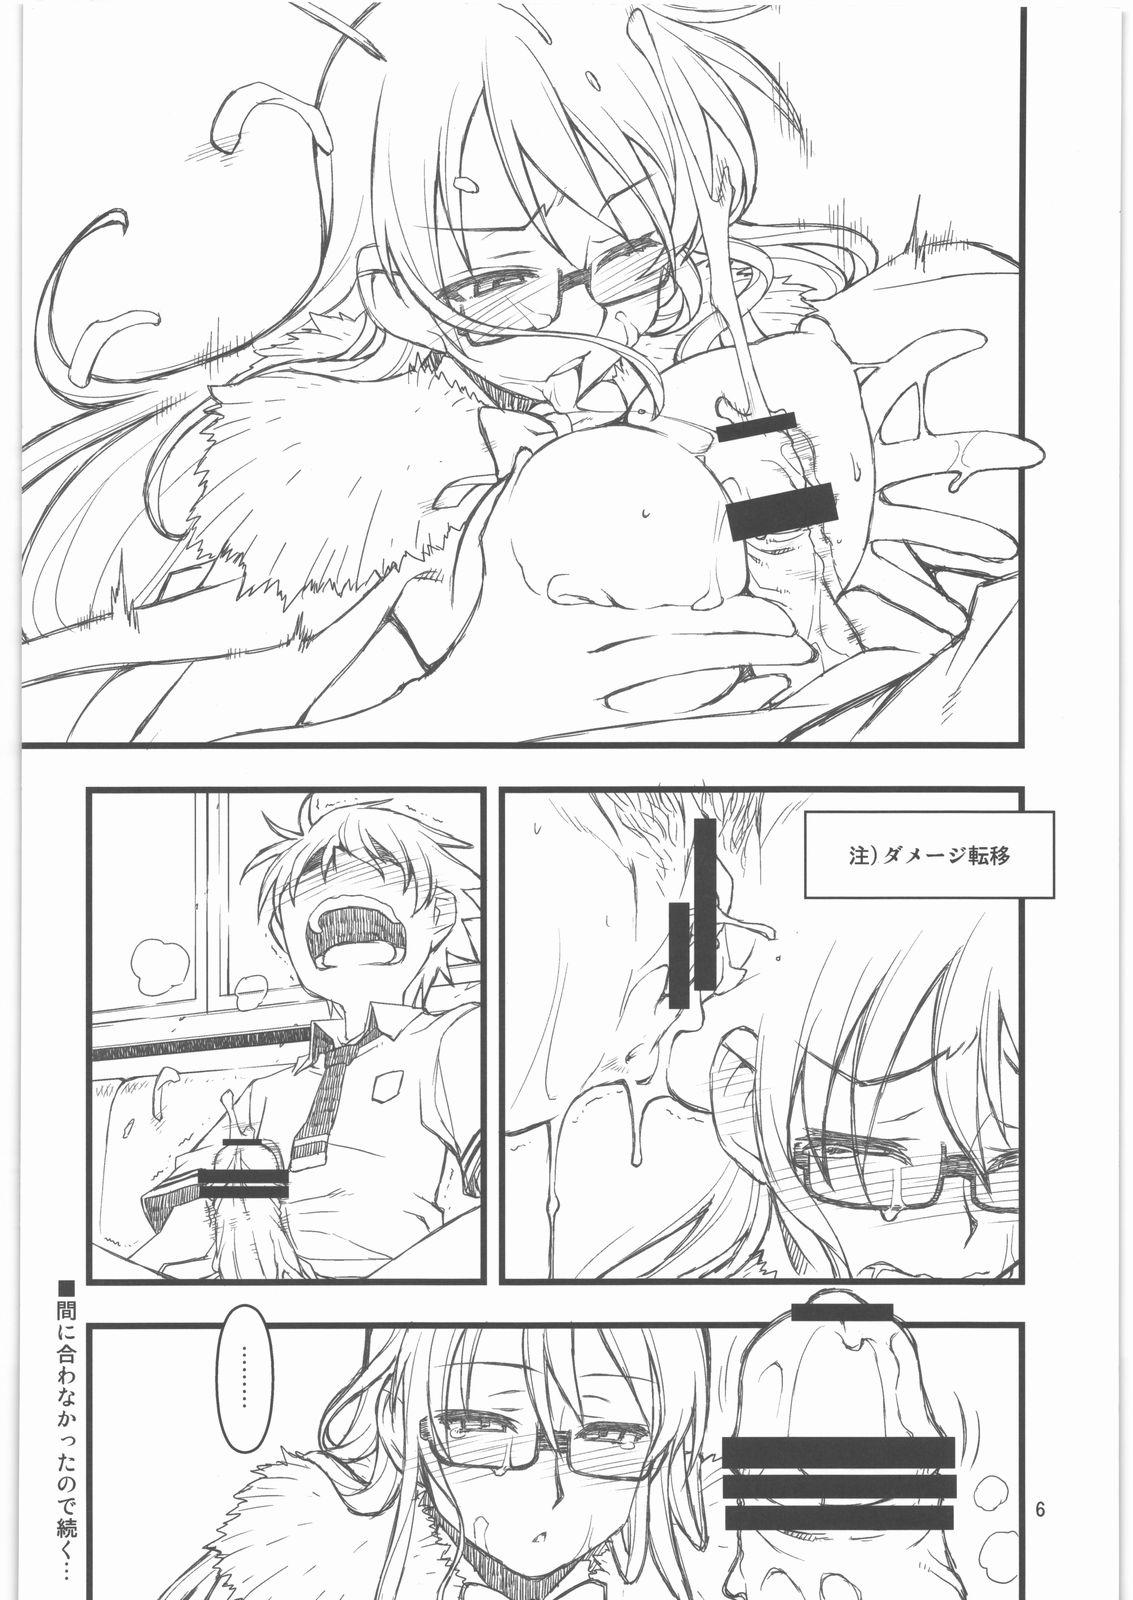 Teacher 30's pre - Witch craft works Teenager - Page 6